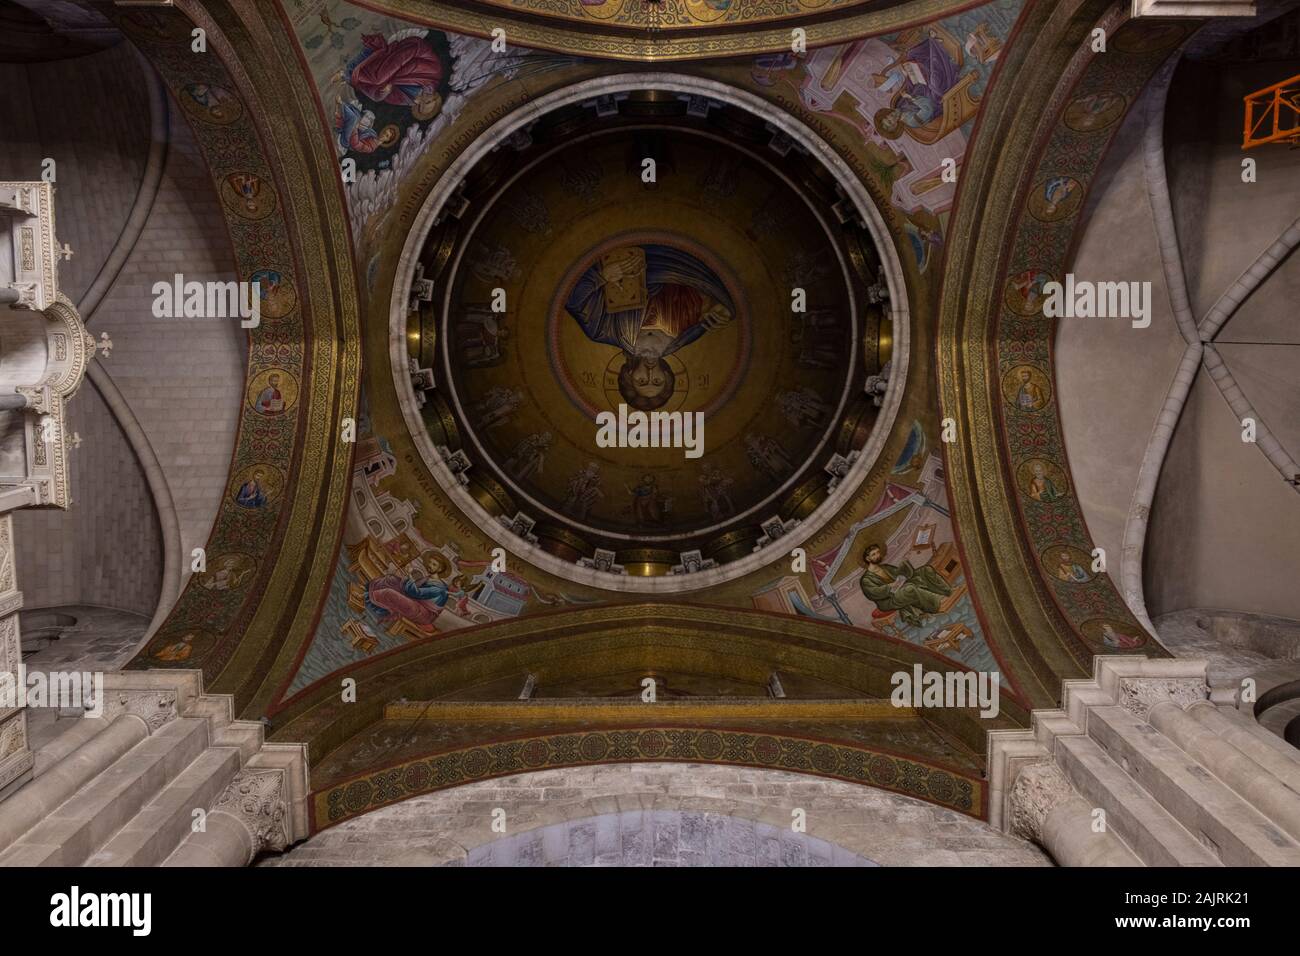 Christ Pantocrator decorates the dome of Greek Orthodox Catholicon chamber at the Holy Sepulchre church in the Old city,Jerusalem Stock Photo